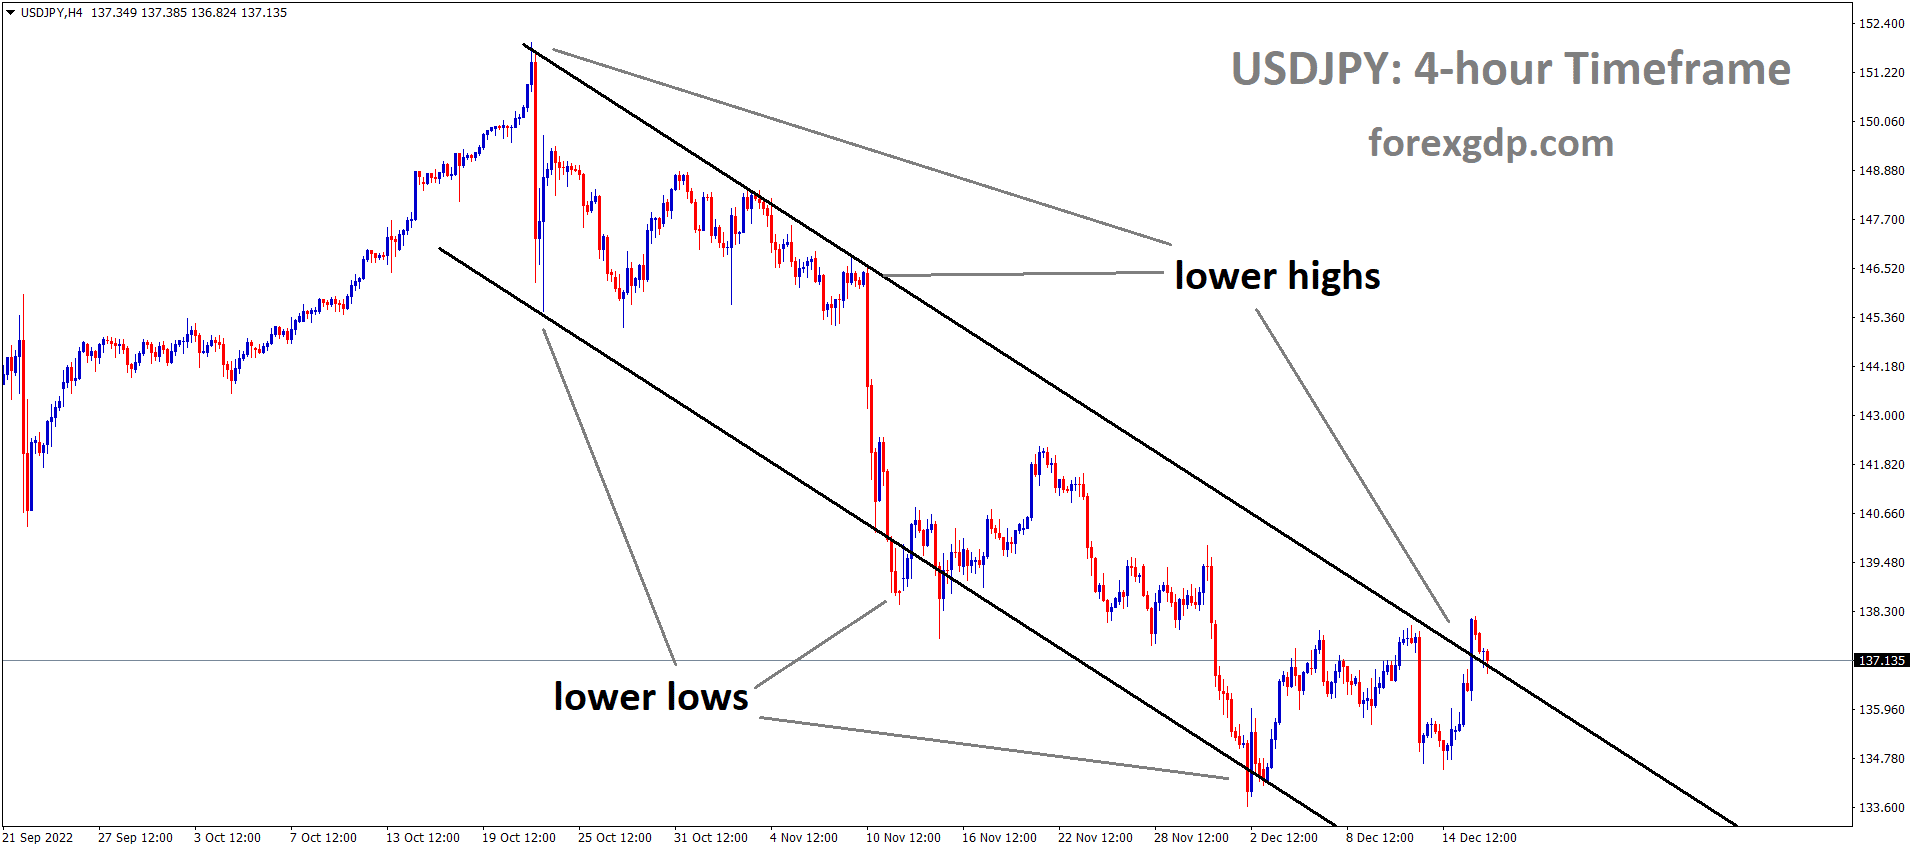 USDJPY is moving in the Descending channel and the market has reached the lower high area of the channel 4